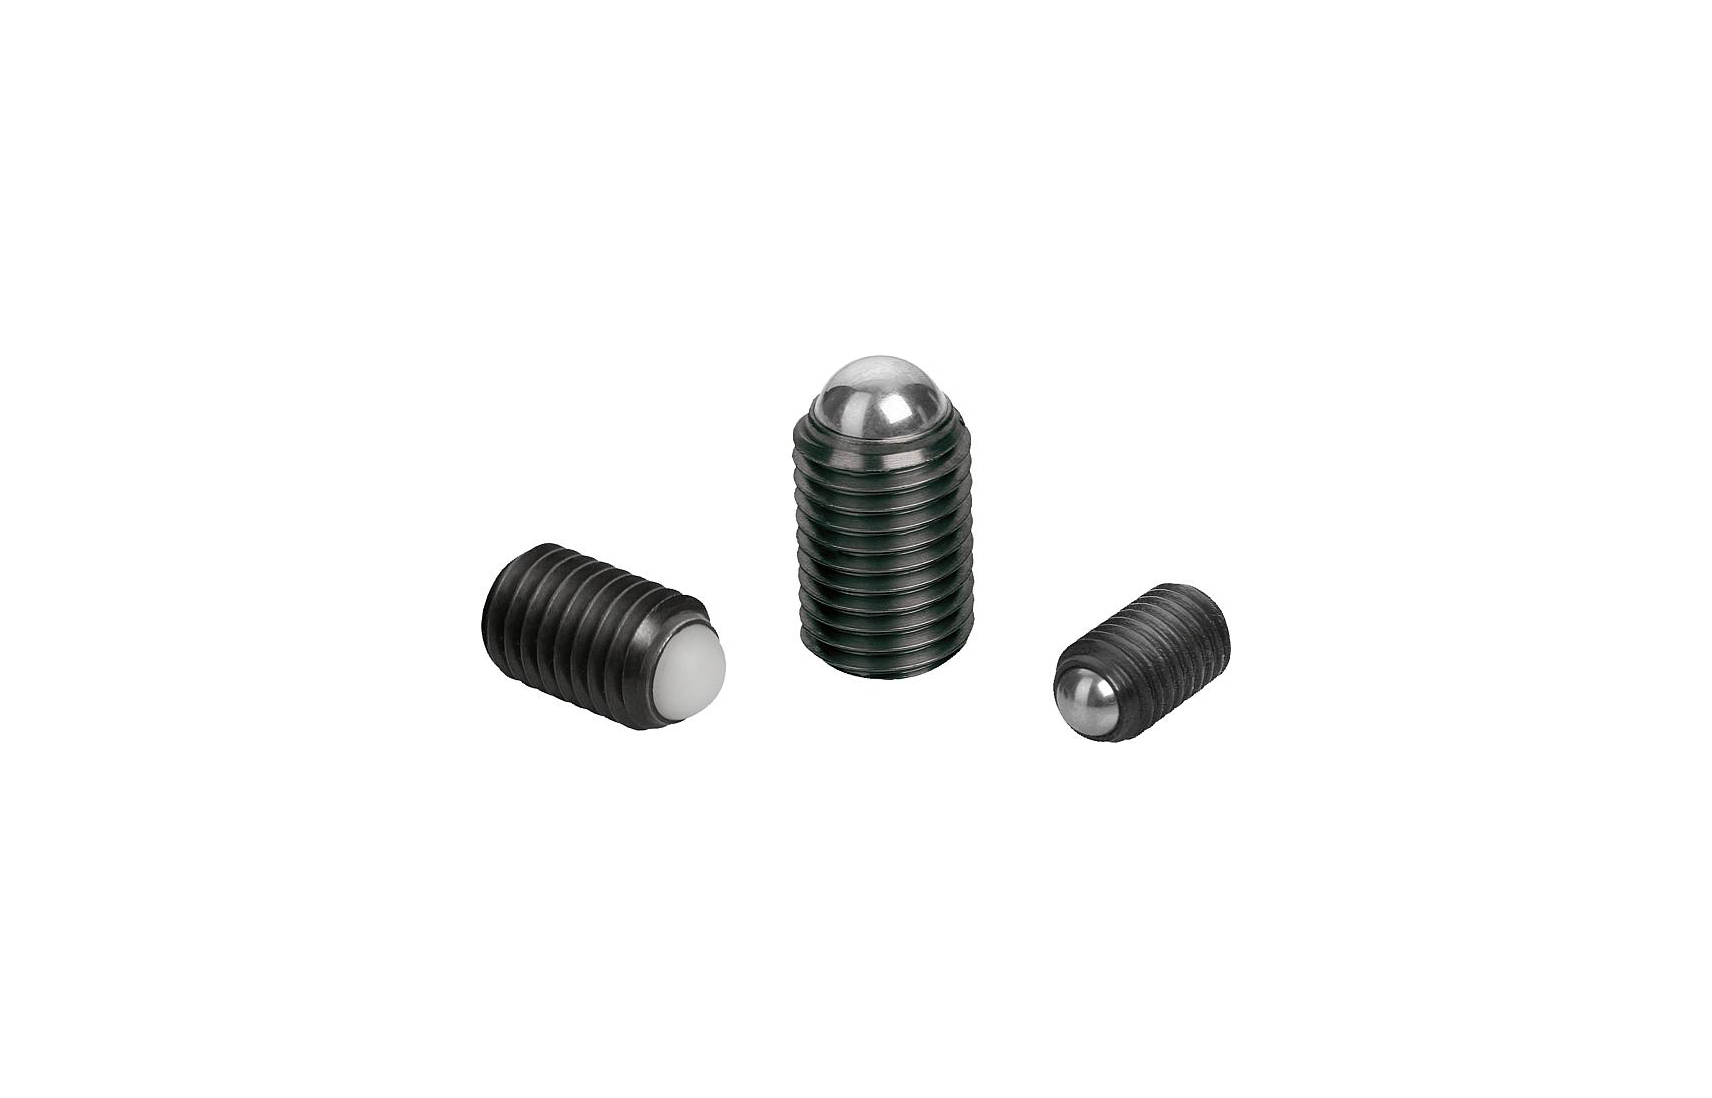 K0383 Ball-end thrust screws without head with full ball